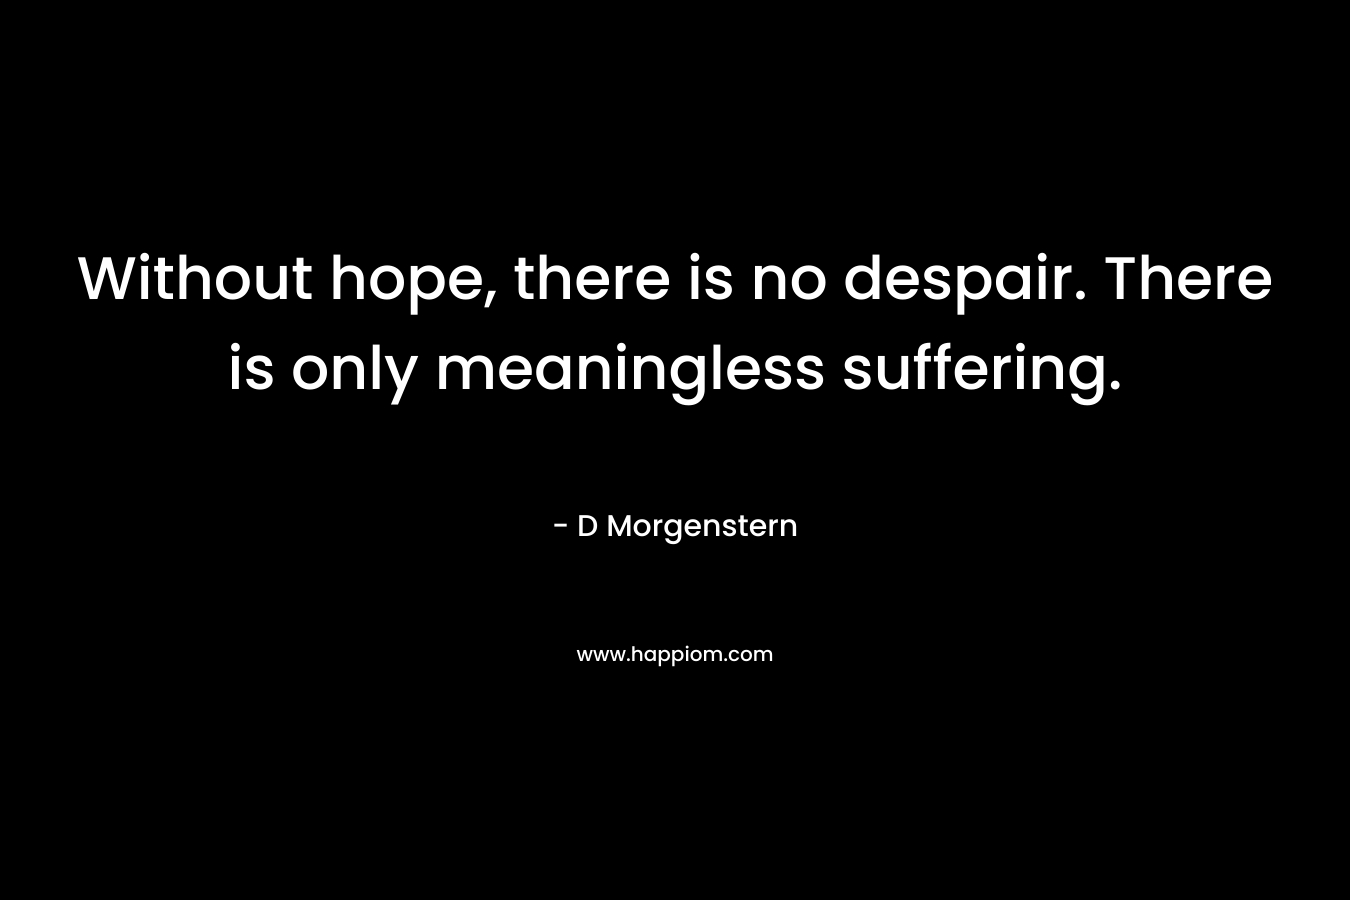 Without hope, there is no despair. There is only meaningless suffering.